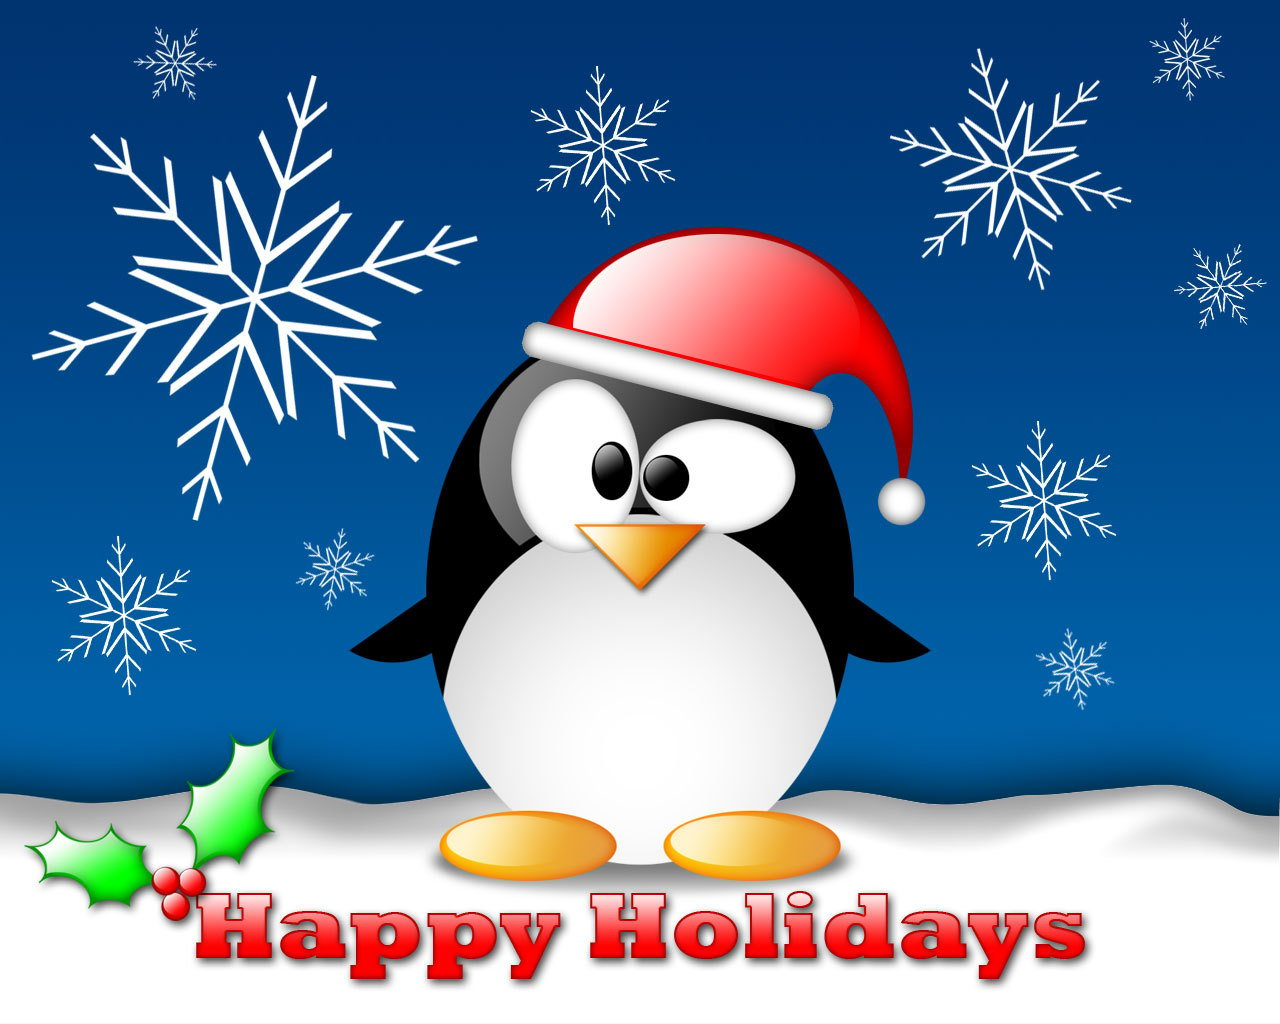 Funny wallpapersHD wallpapers cute christmas wallpapers 1280x1024